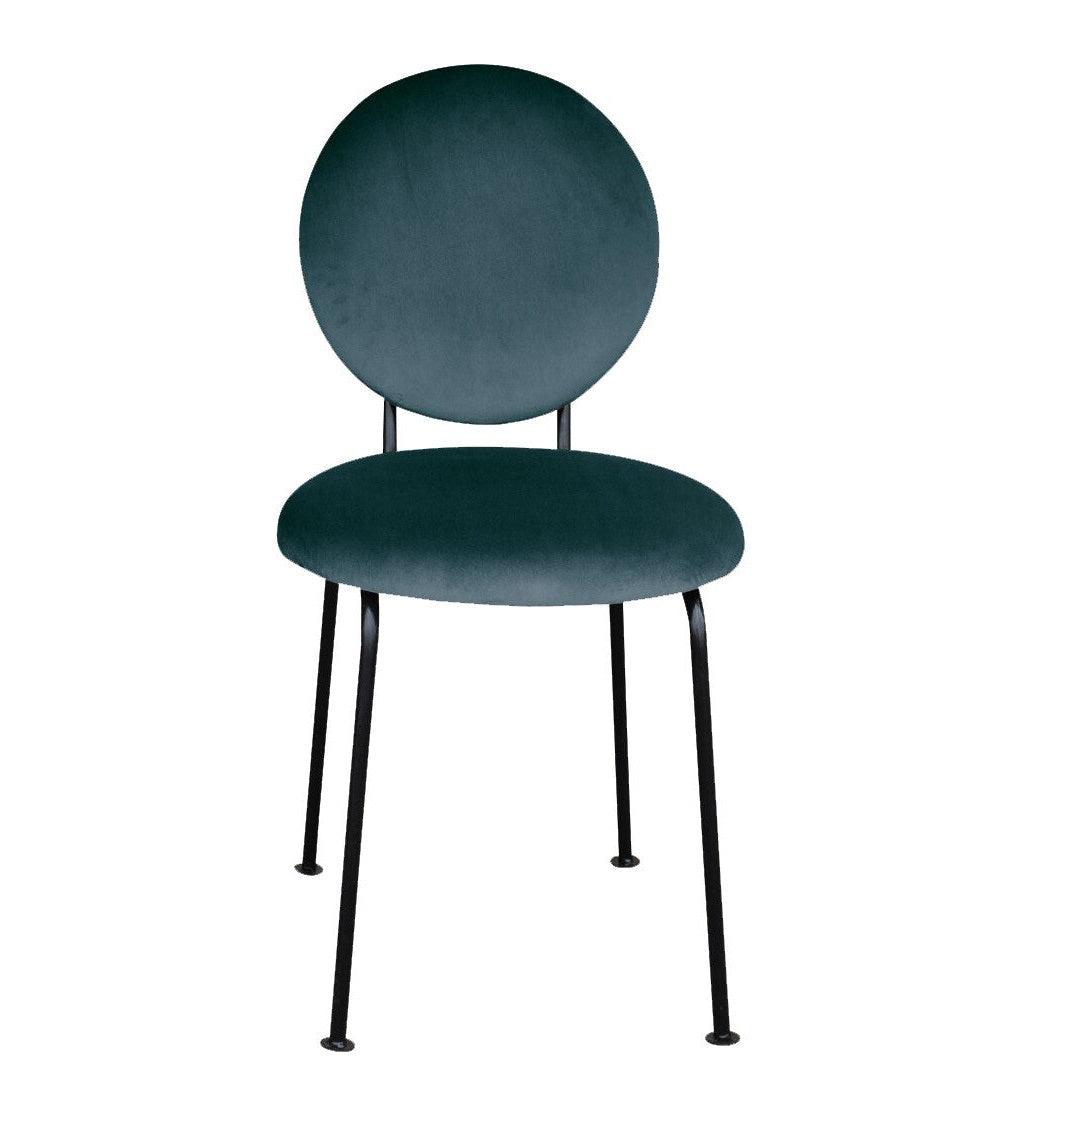 MEDALLION turquoise chair